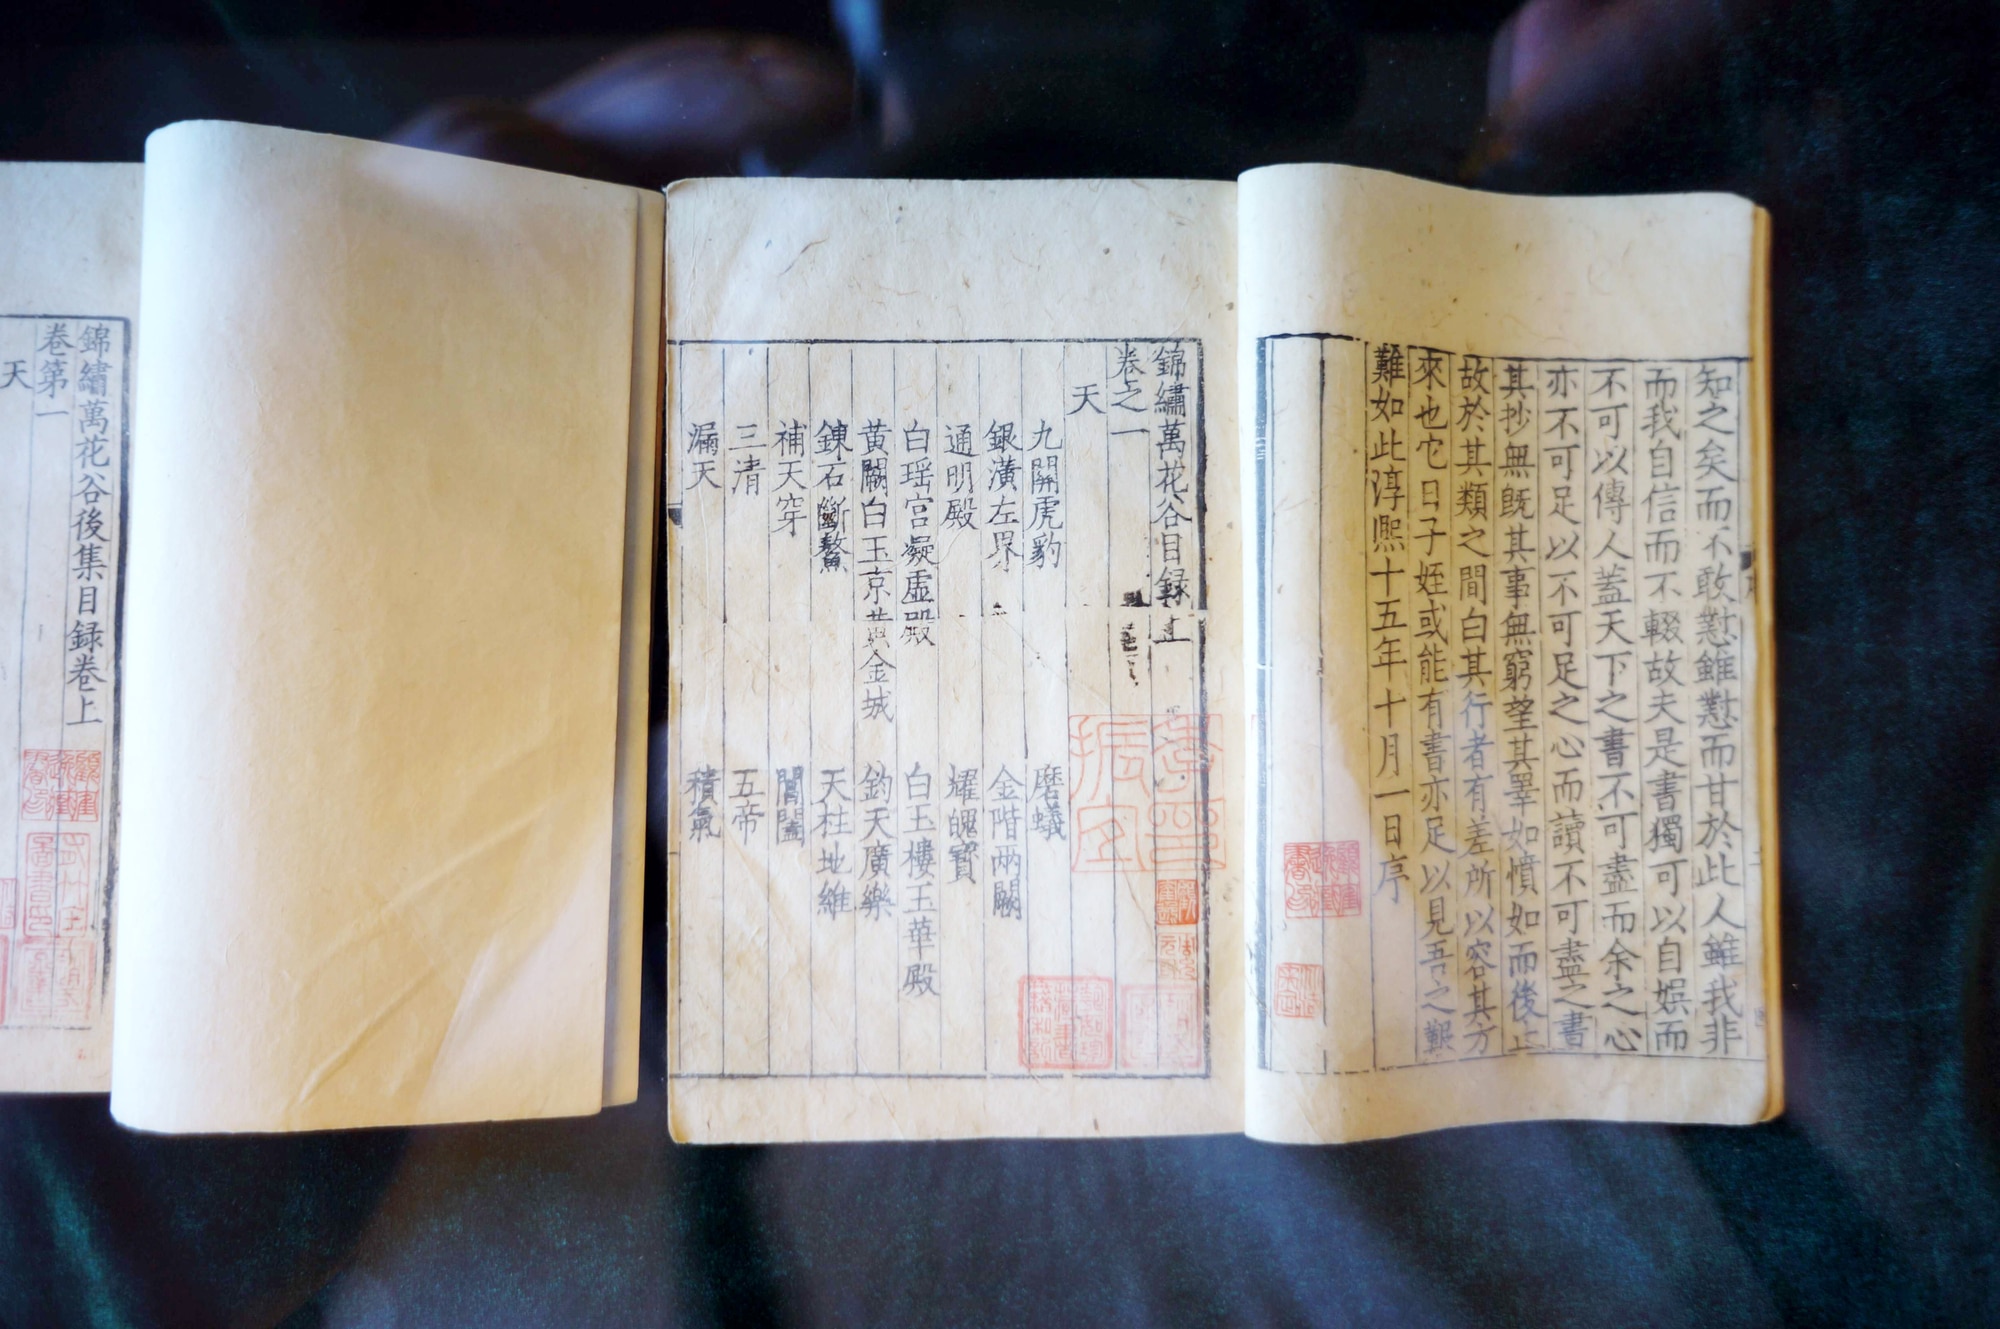 An image of a paper scroll with traditional Chinese characters